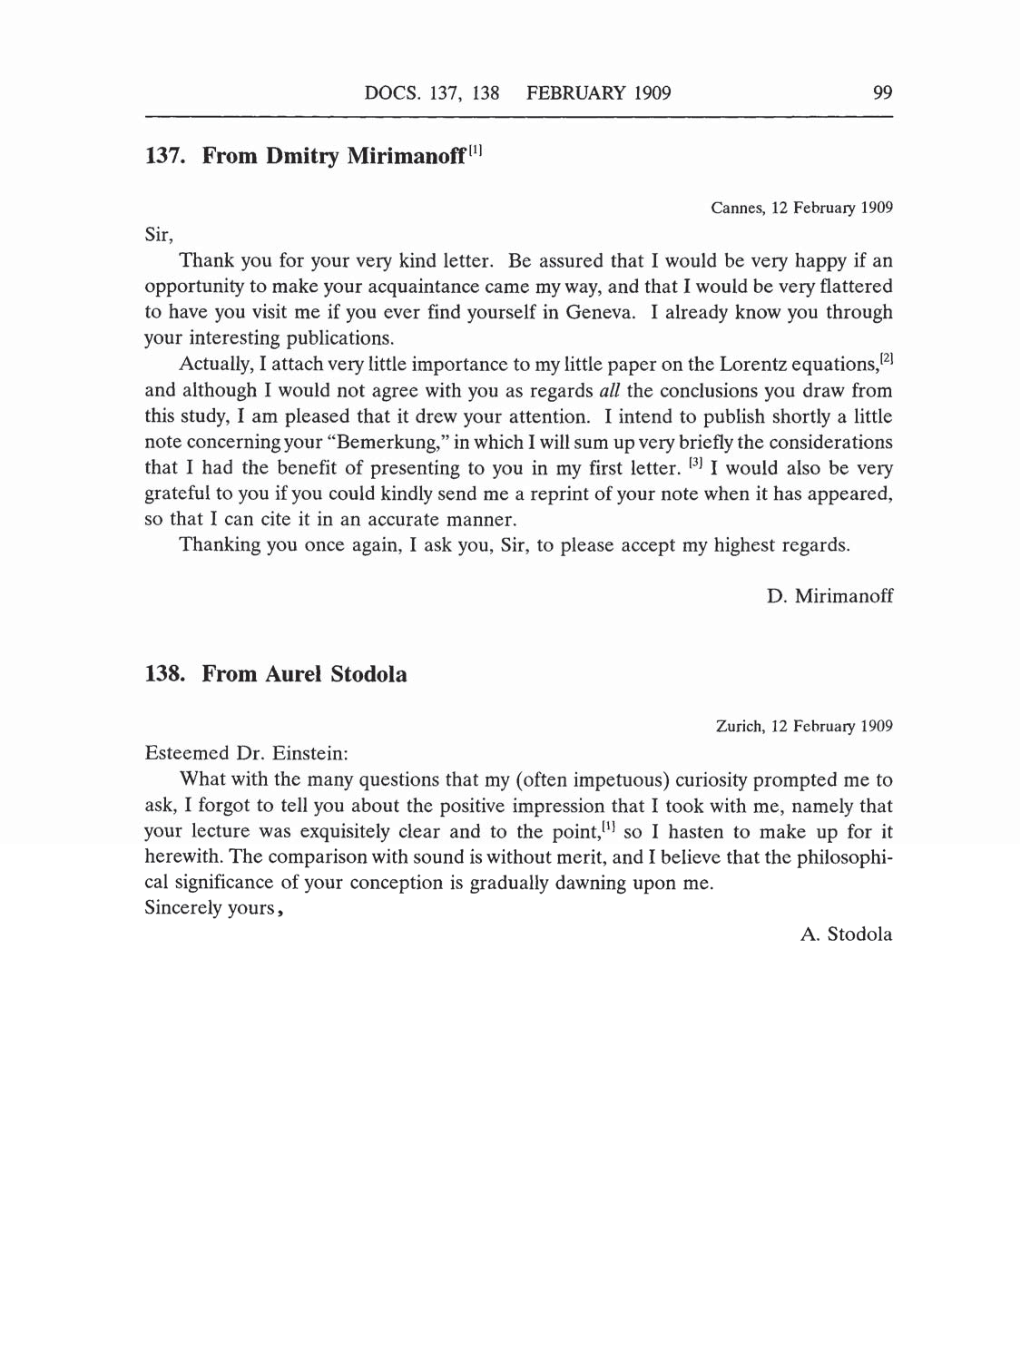 Volume 5: The Swiss Years: Correspondence, 1902-1914 (English translation supplement) page 99